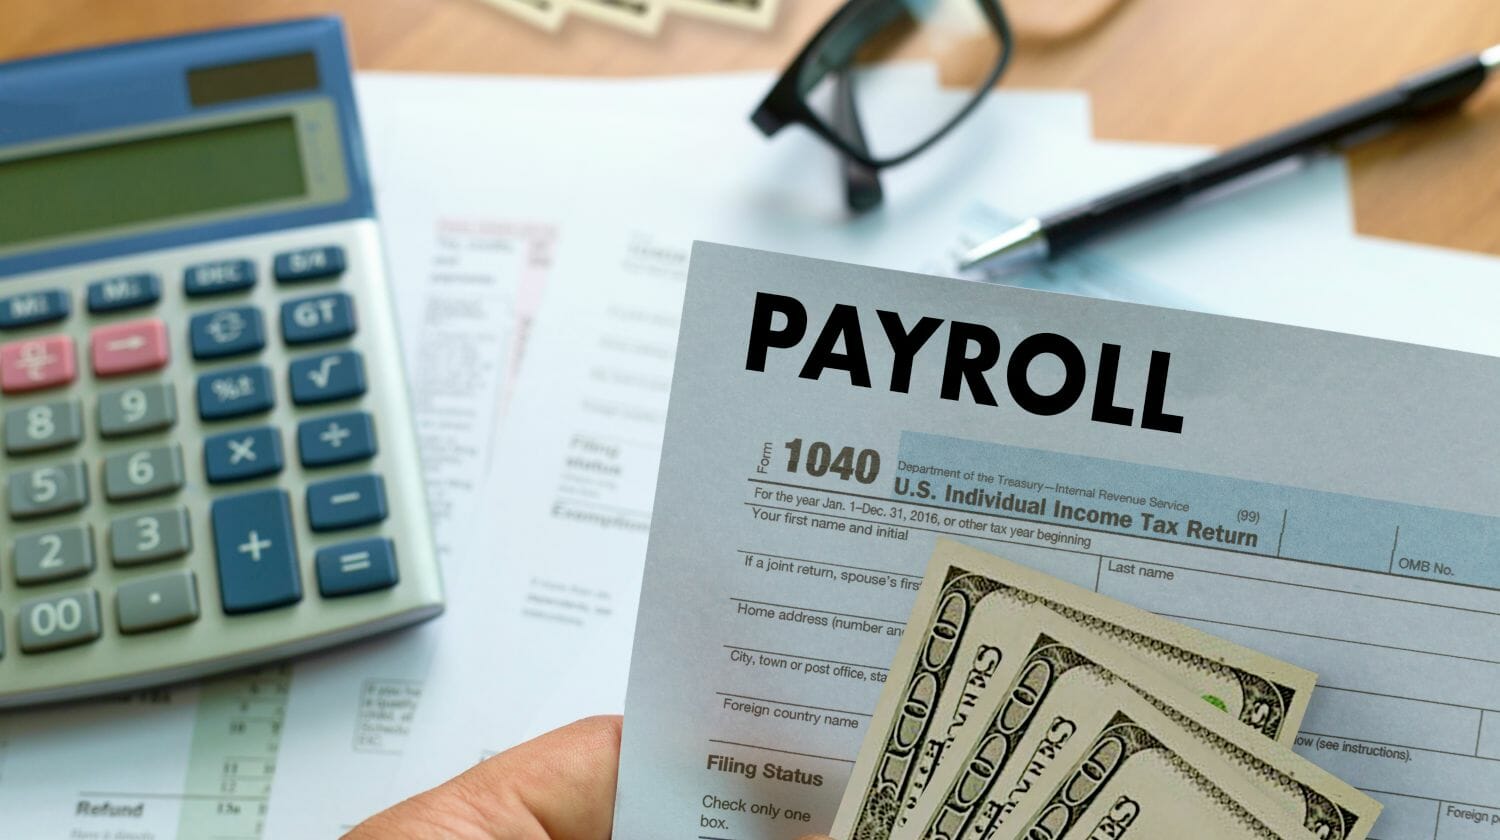 Feature | businessman holding payroll | How To Negotiate Unpaid Employer Payroll Taxes | payroll taxes